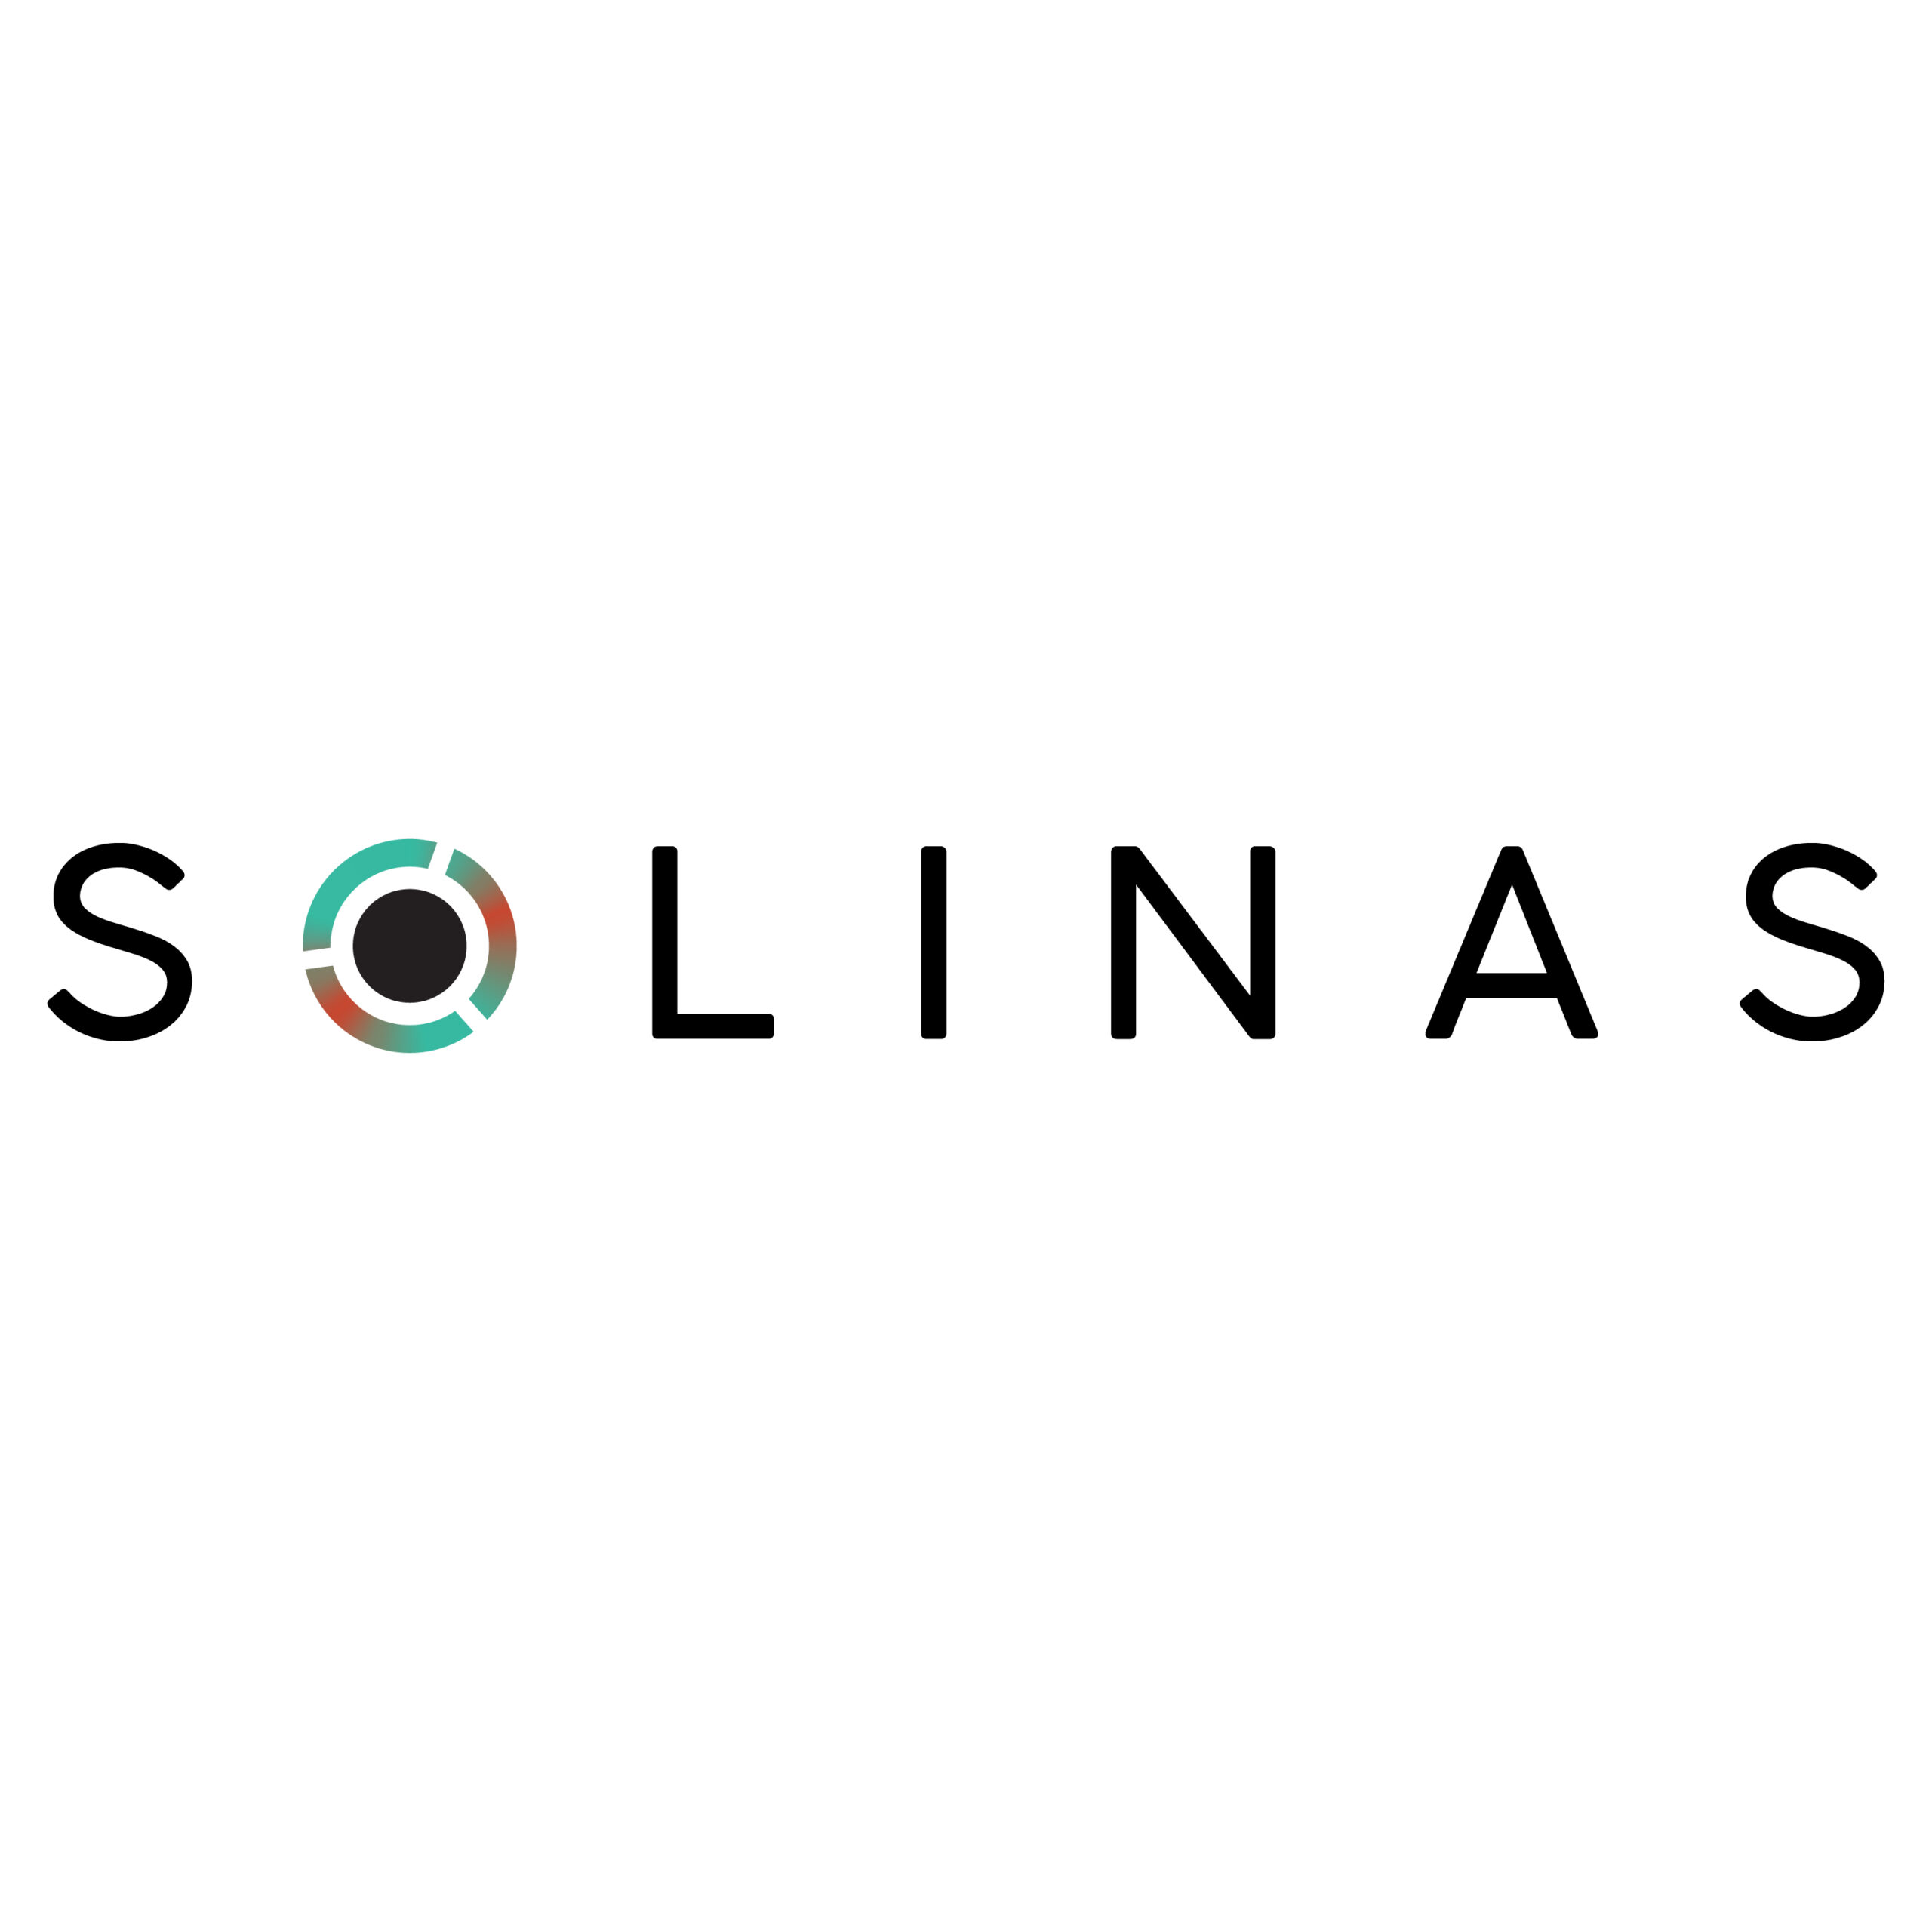 ACT For Environment welcomes Solinas Integrity to its portfolio